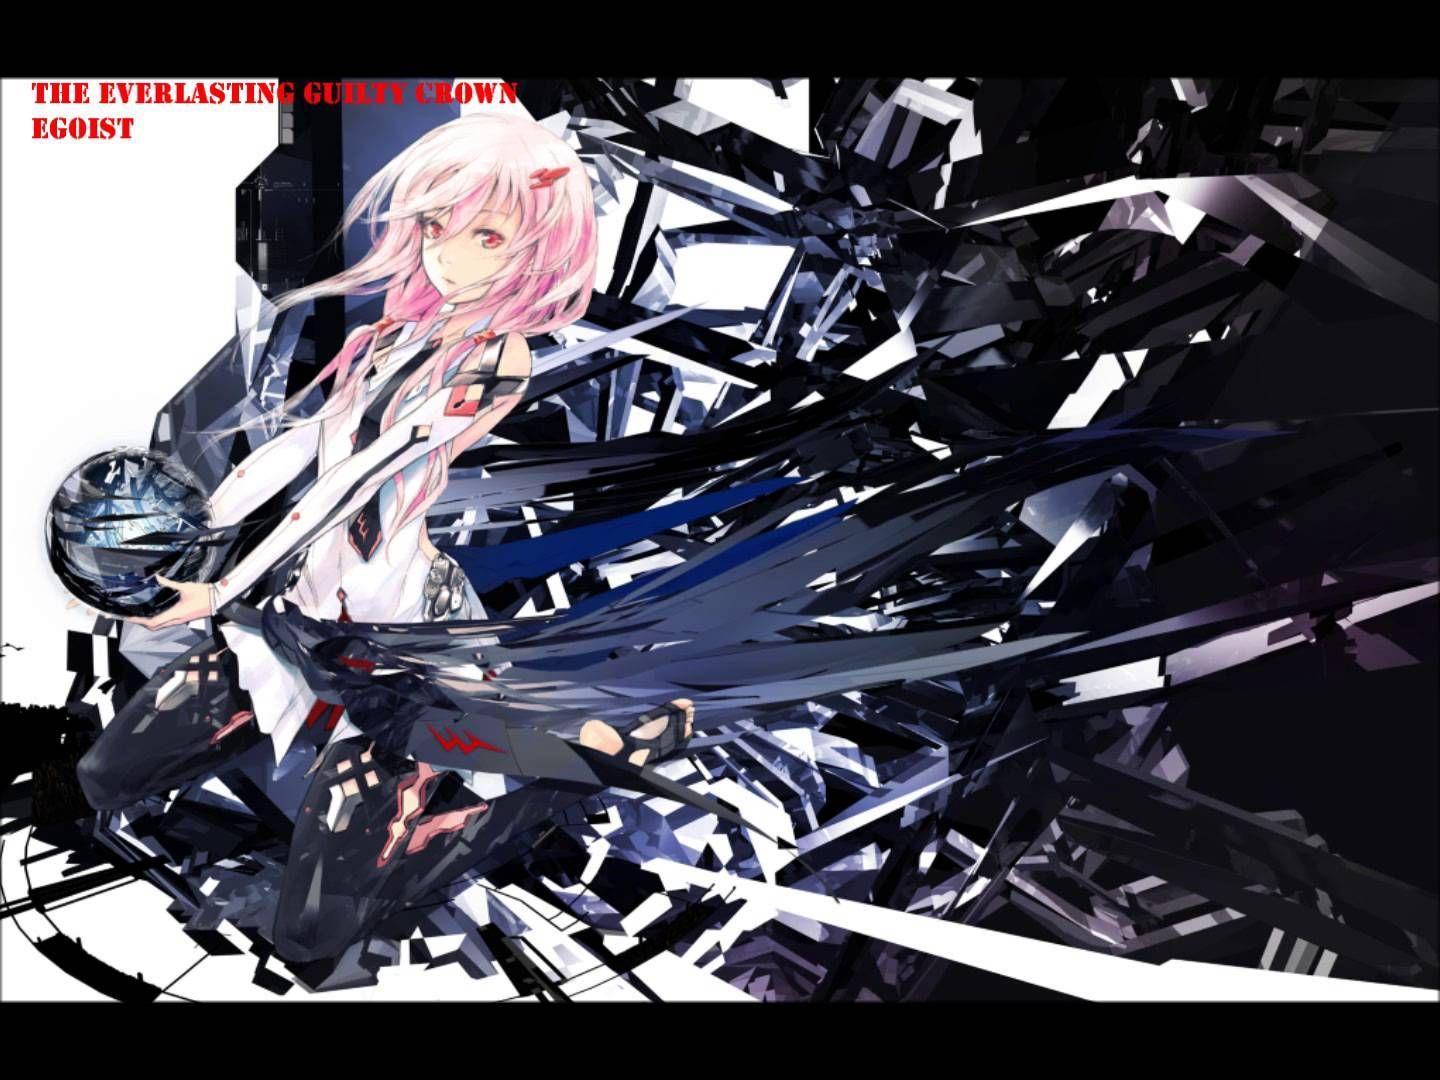 The Everlasting Guilty Crown [EGOIST] with Lyrics BEST Song ever